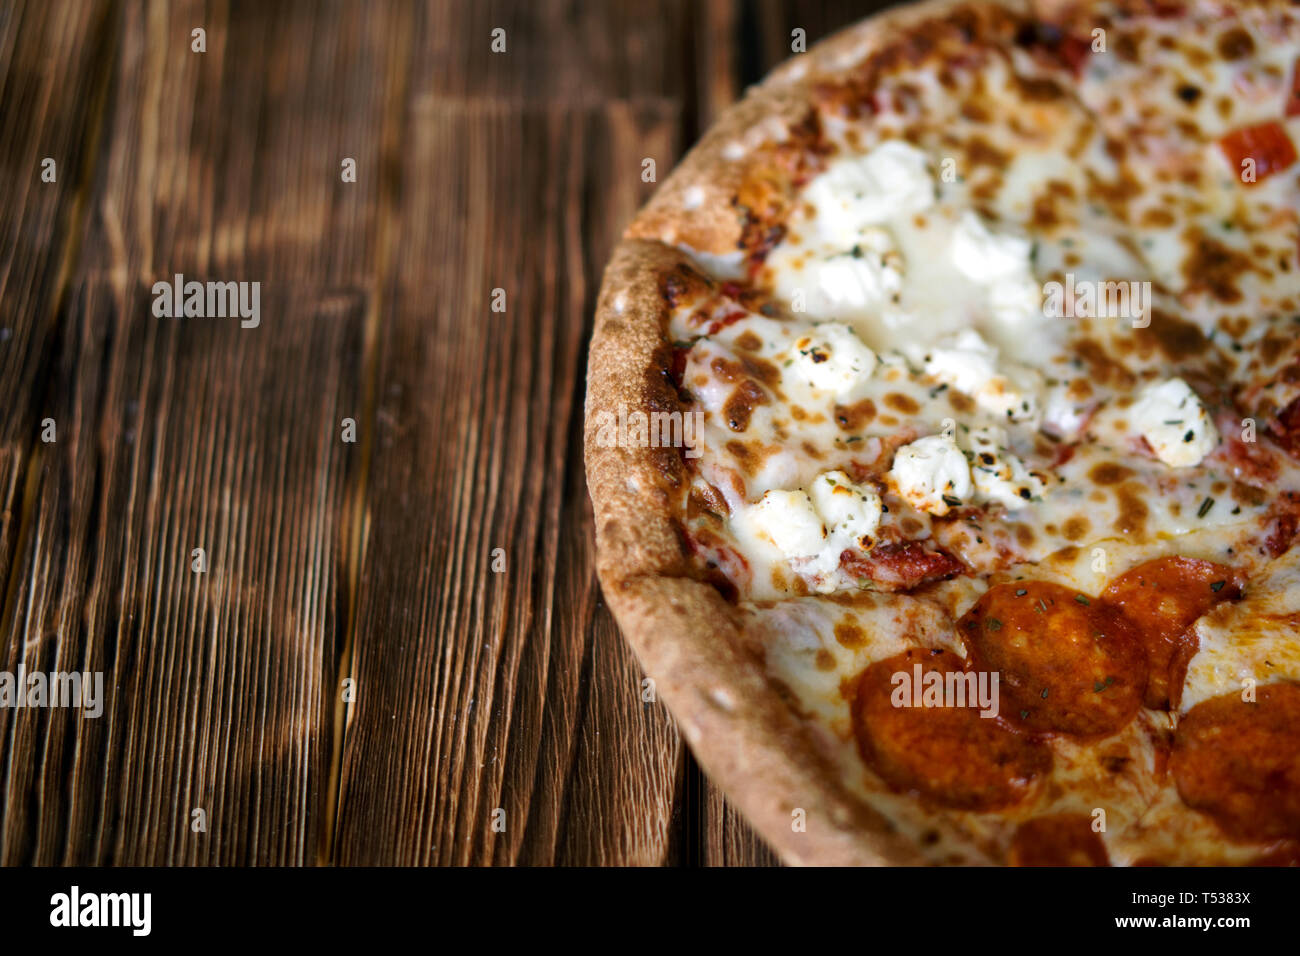 Composite-assorted pizza on a natural wooden surface of pine boards. Daylight. Close-up. Free space to sign. Shallow depth of field. Stock Photo